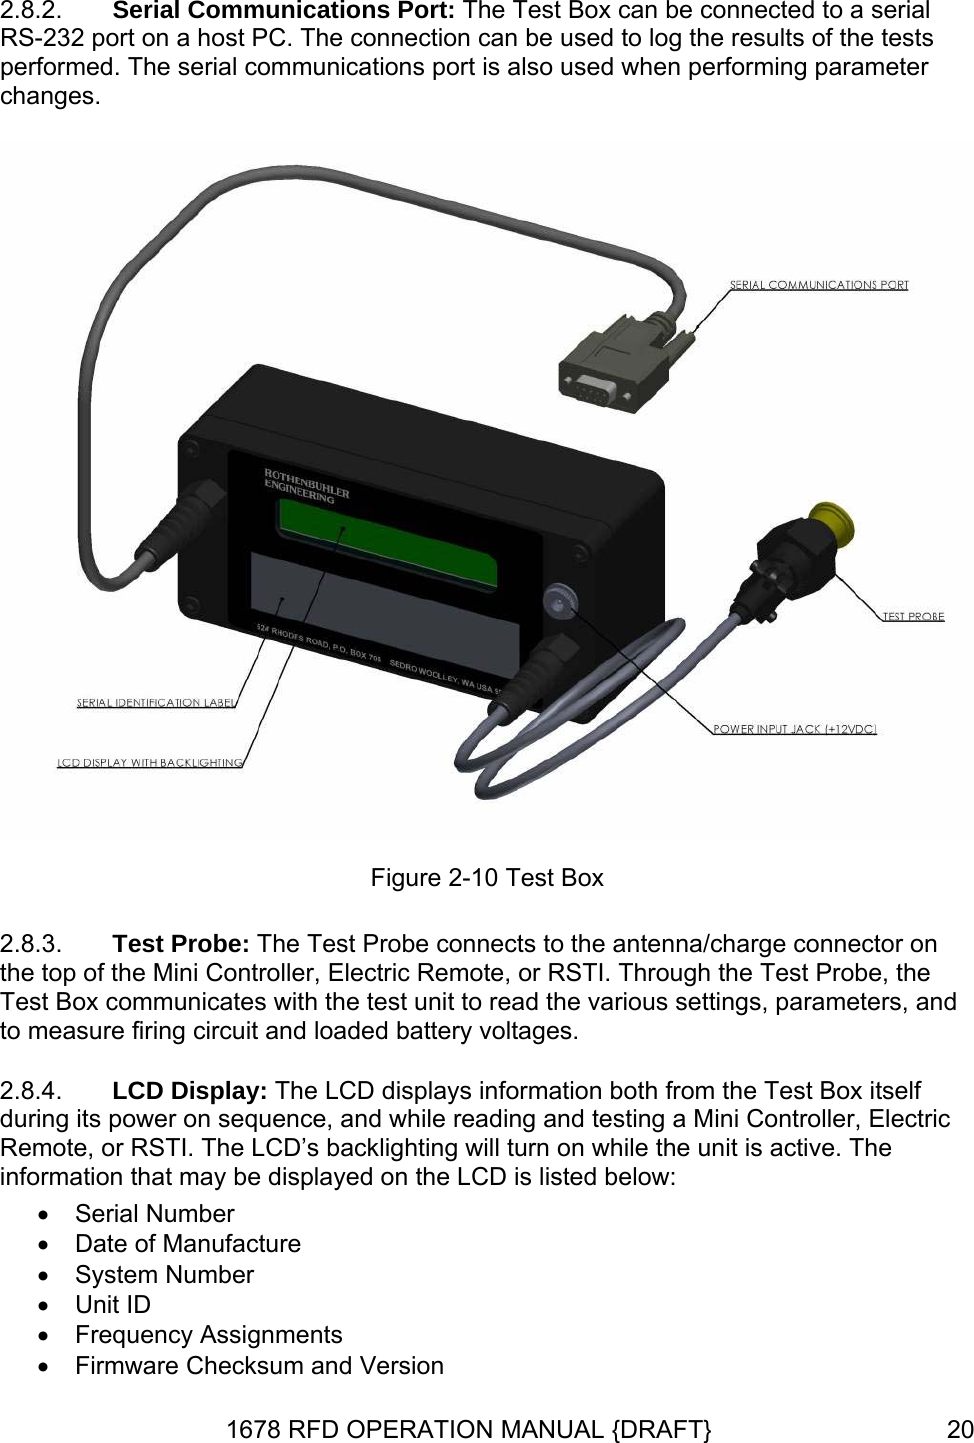 2.8.2.  Serial Communications Port: The Test Box can be connected to a serial RS-232 port on a host PC. The connection can be used to log the results of the tests performed. The serial communications port is also used when performing parameter changes.  Figure 2-10 Test Box 2.8.3. 2.8.4. Test Probe: The Test Probe connects to the antenna/charge connector on the top of the Mini Controller, Electric Remote, or RSTI. Through the Test Probe, the Test Box communicates with the test unit to read the various settings, parameters, and to measure firing circuit and loaded battery voltages. LCD Display: The LCD displays information both from the Test Box itself during its power on sequence, and while reading and testing a Mini Controller, Electric Remote, or RSTI. The LCD’s backlighting will turn on while the unit is active. The information that may be displayed on the LCD is listed below: • Serial Number •  Date of Manufacture • System Number • Unit ID • Frequency Assignments •  Firmware Checksum and Version 1678 RFD OPERATION MANUAL {DRAFT}  20